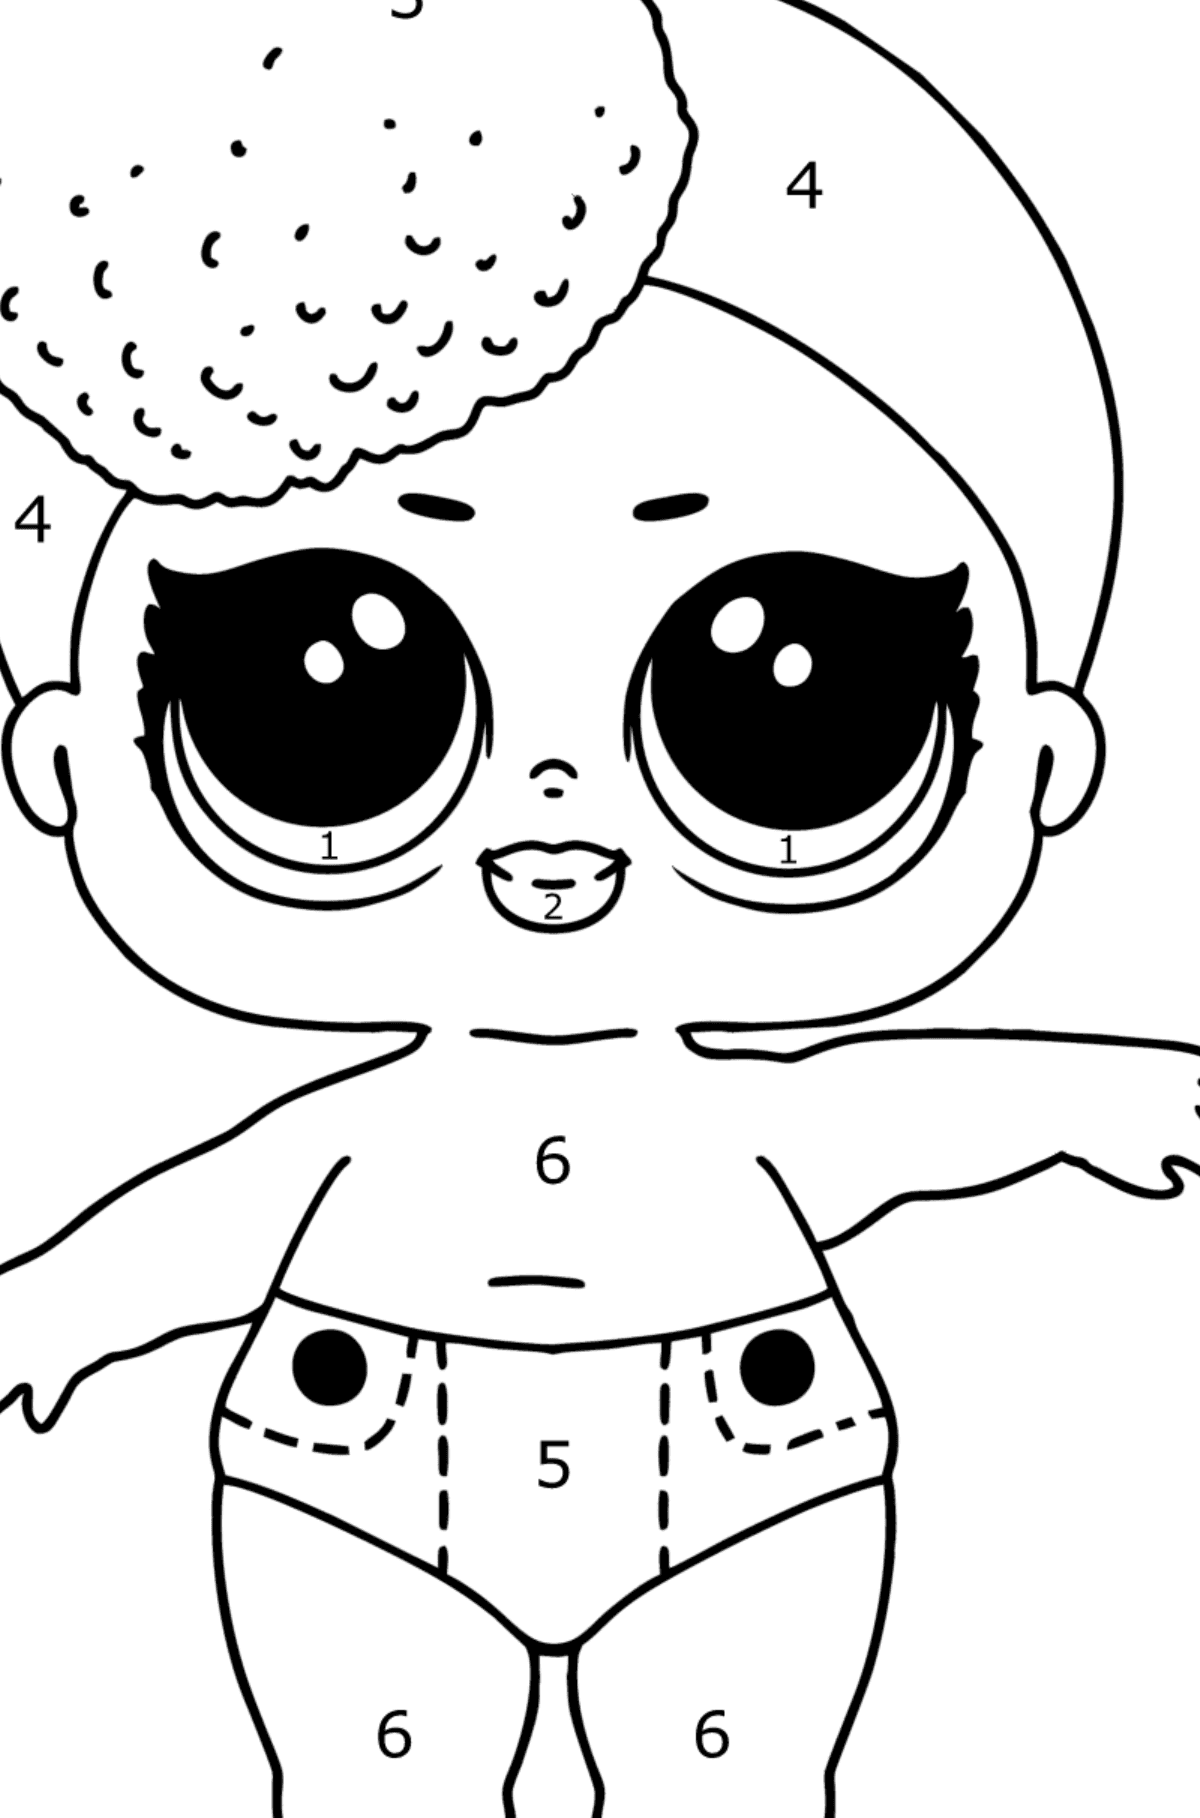 Coloring page LOL LIL Independent - Coloring by Numbers for Kids